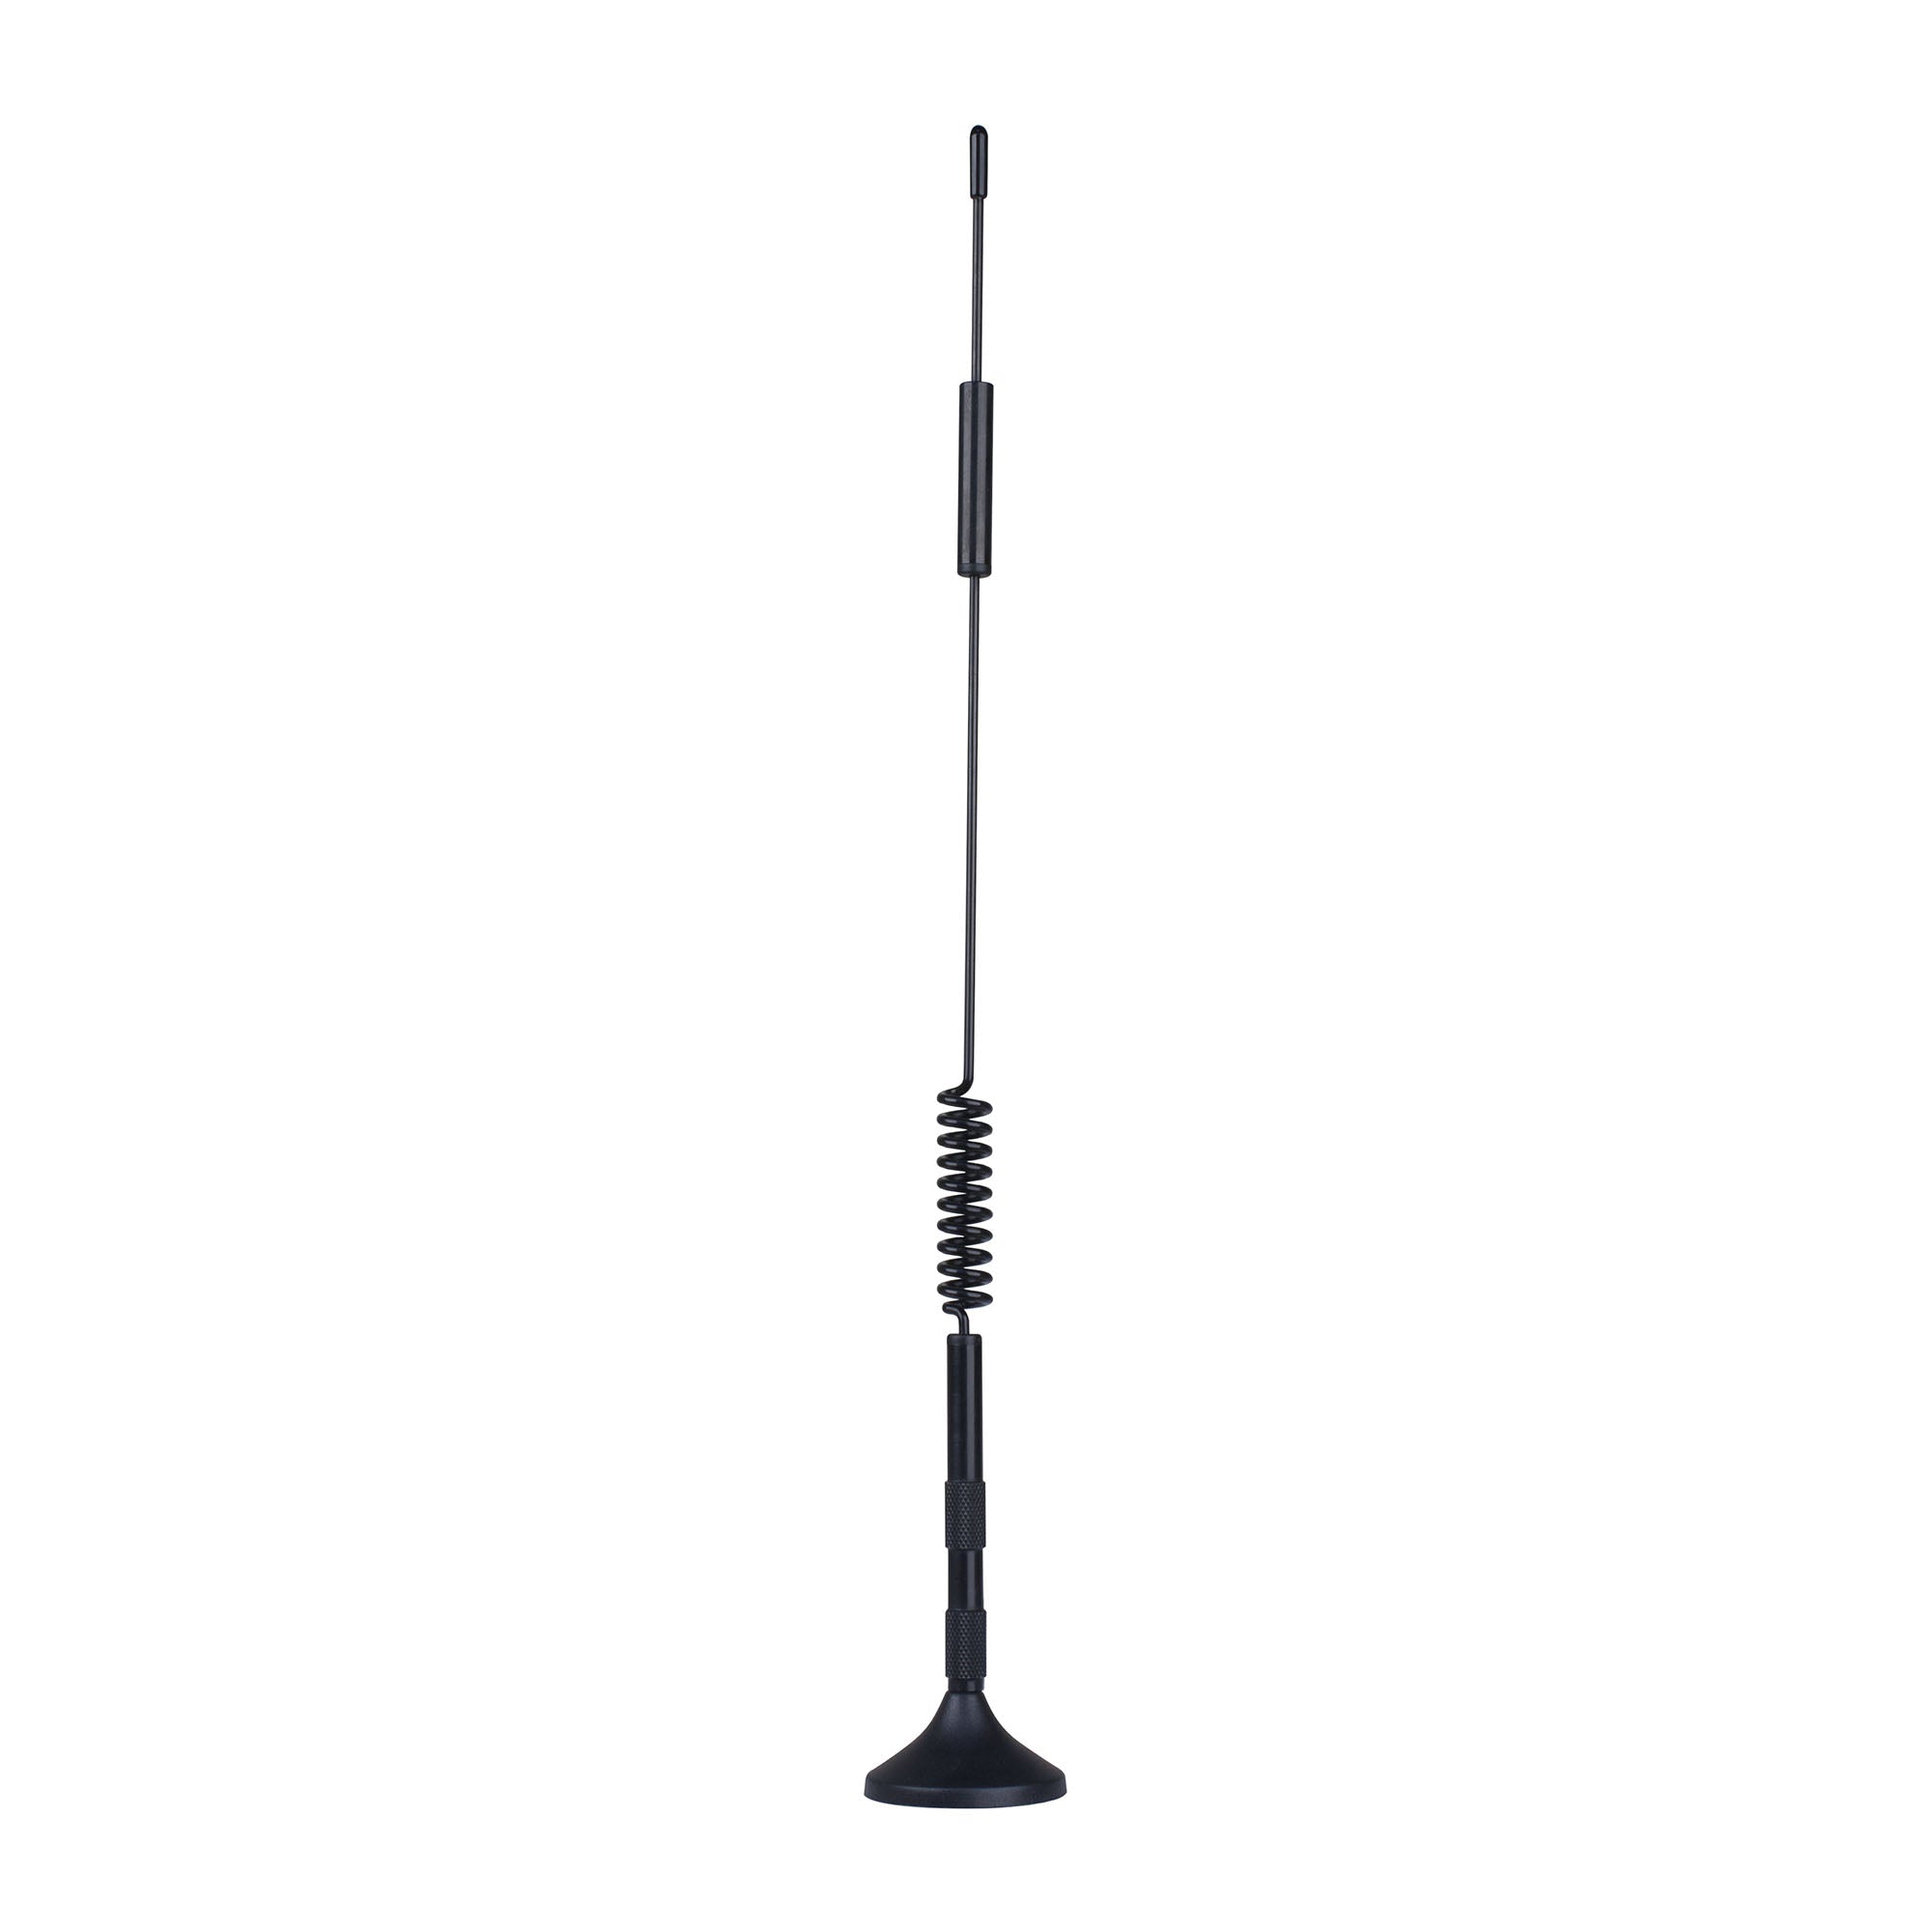 Wilson Magnet Mount Antenna 3G/4G Omni Directional w/ 12.5 ft. RG174 A/U Cable and SMA Male - 680WI311125